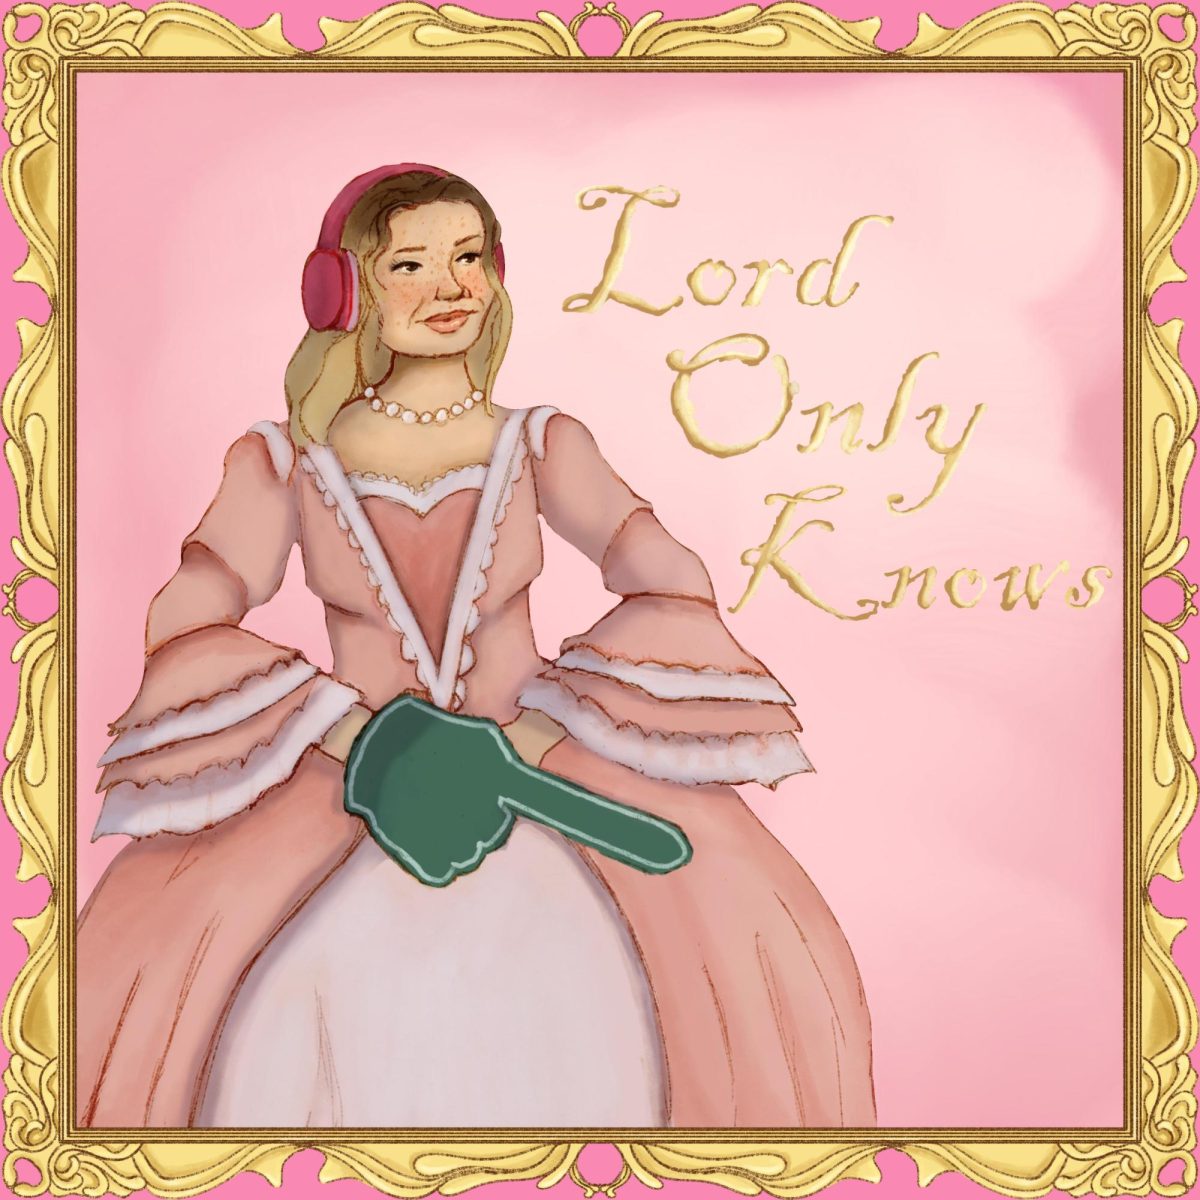 Lord+Only+Knows+%7C+Welcome+to+Lord+Only+Knows